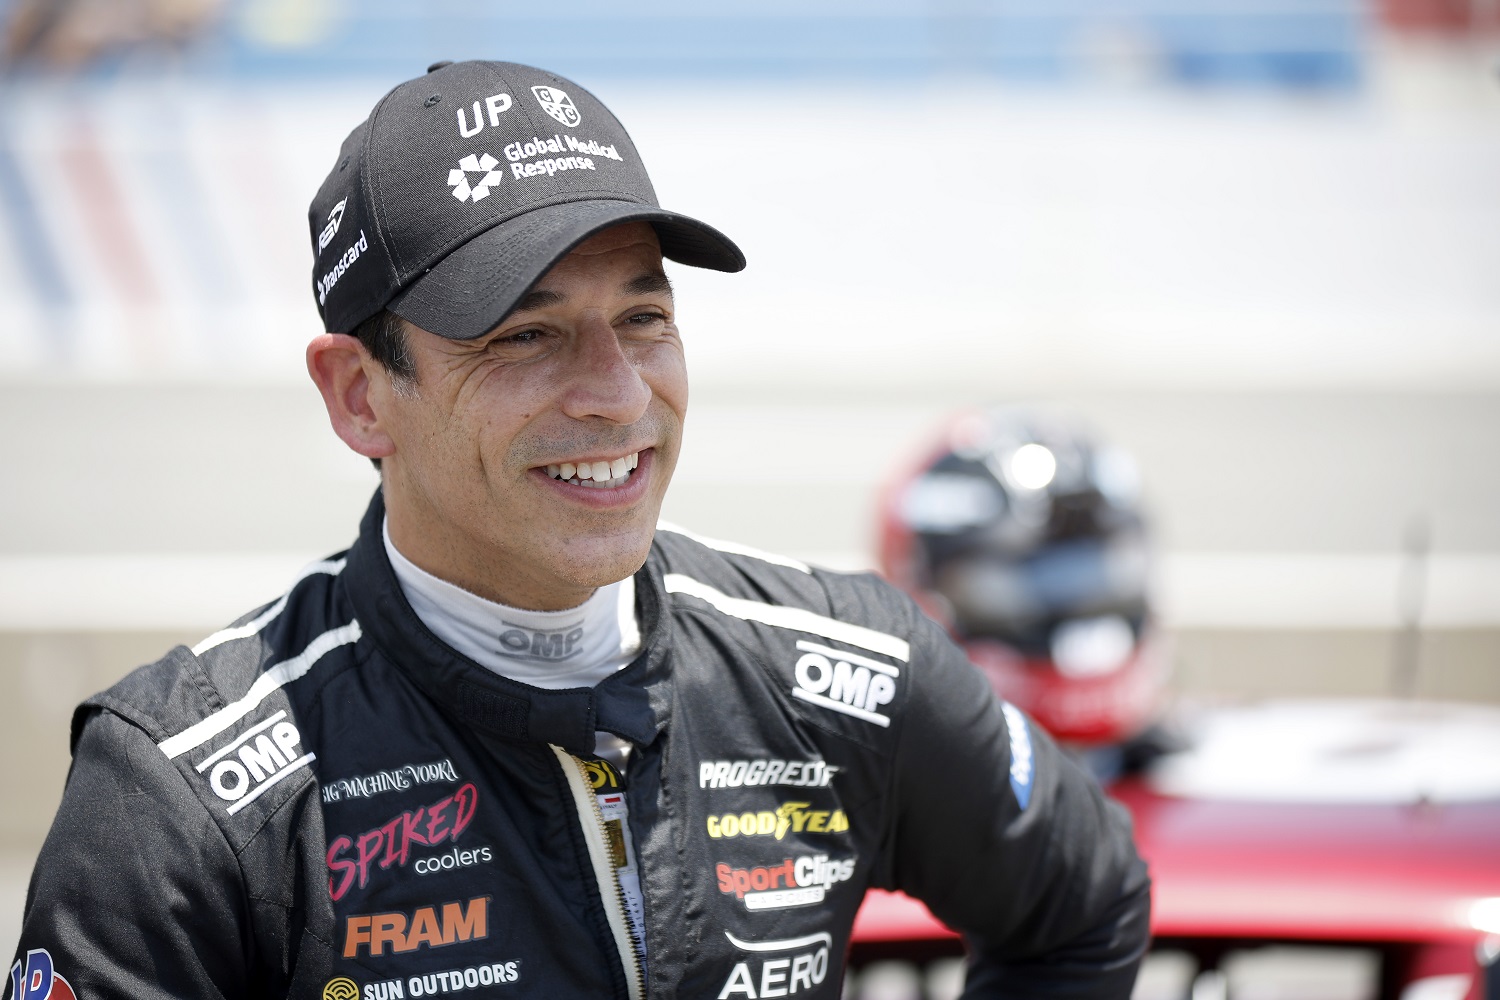 Helio Castroneves on the grid during practice for the Superstar Racing Experience event at South Boston Speedway on June 25, 2022 in South Boston, Virginia.